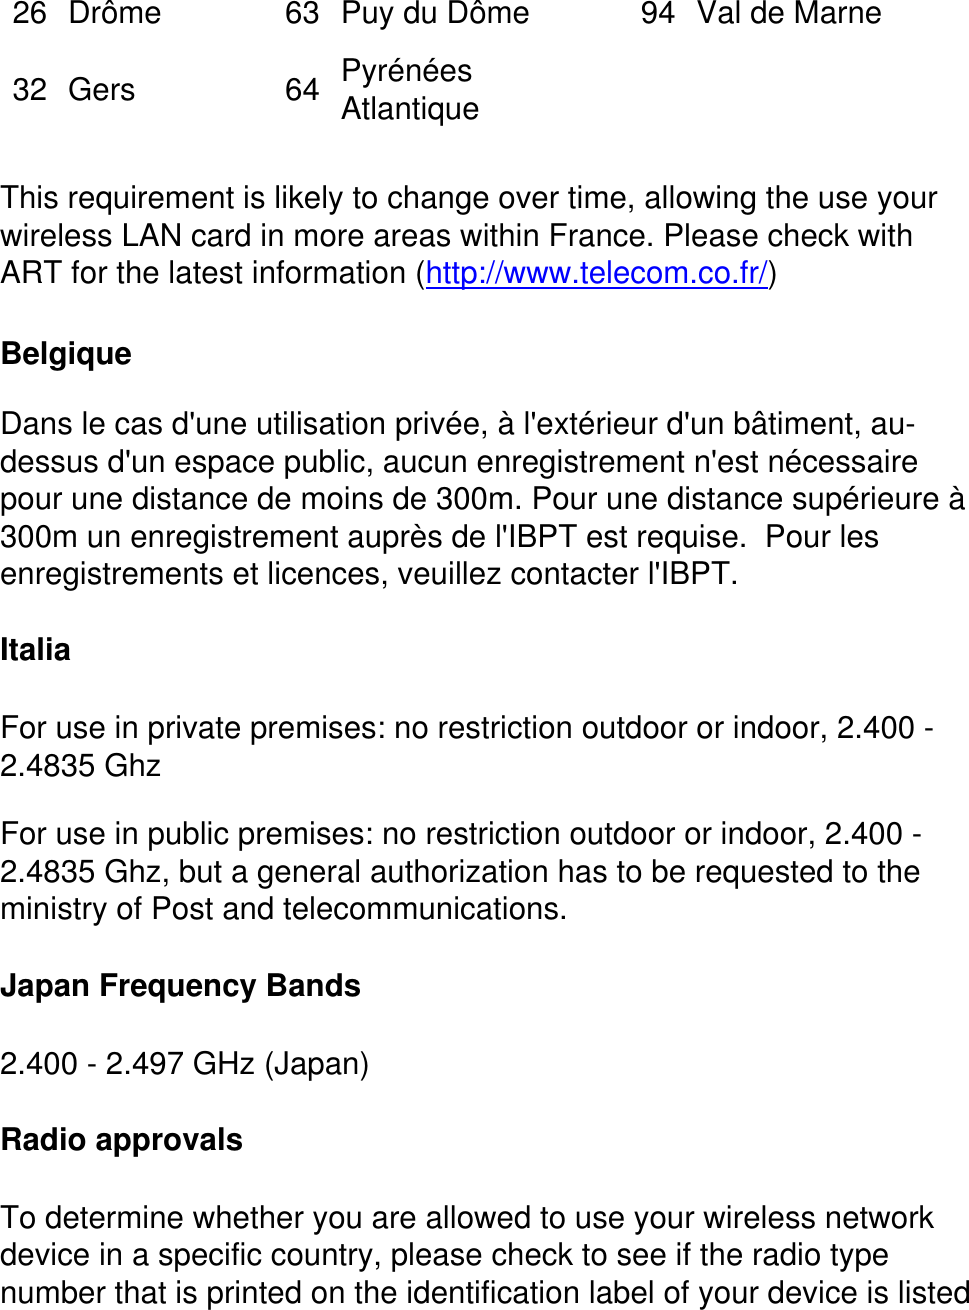 26 Drôme 63 Puy du Dôme 94 Val de Marne32 Gers 64 Pyrénées Atlantique    This requirement is likely to change over time, allowing the use your wireless LAN card in more areas within France. Please check with ART for the latest information (http://www.telecom.co.fr/)Belgique Dans le cas d&apos;une utilisation privée, à l&apos;extérieur d&apos;un bâtiment, au-dessus d&apos;un espace public, aucun enregistrement n&apos;est nécessaire pour une distance de moins de 300m. Pour une distance supérieure à 300m un enregistrement auprès de l&apos;IBPT est requise.  Pour les enregistrements et licences, veuillez contacter l&apos;IBPT.ItaliaFor use in private premises: no restriction outdoor or indoor, 2.400 - 2.4835 GhzFor use in public premises: no restriction outdoor or indoor, 2.400 - 2.4835 Ghz, but a general authorization has to be requested to the ministry of Post and telecommunications. Japan Frequency Bands2.400 - 2.497 GHz (Japan)Radio approvalsTo determine whether you are allowed to use your wireless network device in a specific country, please check to see if the radio type number that is printed on the identification label of your device is listed 